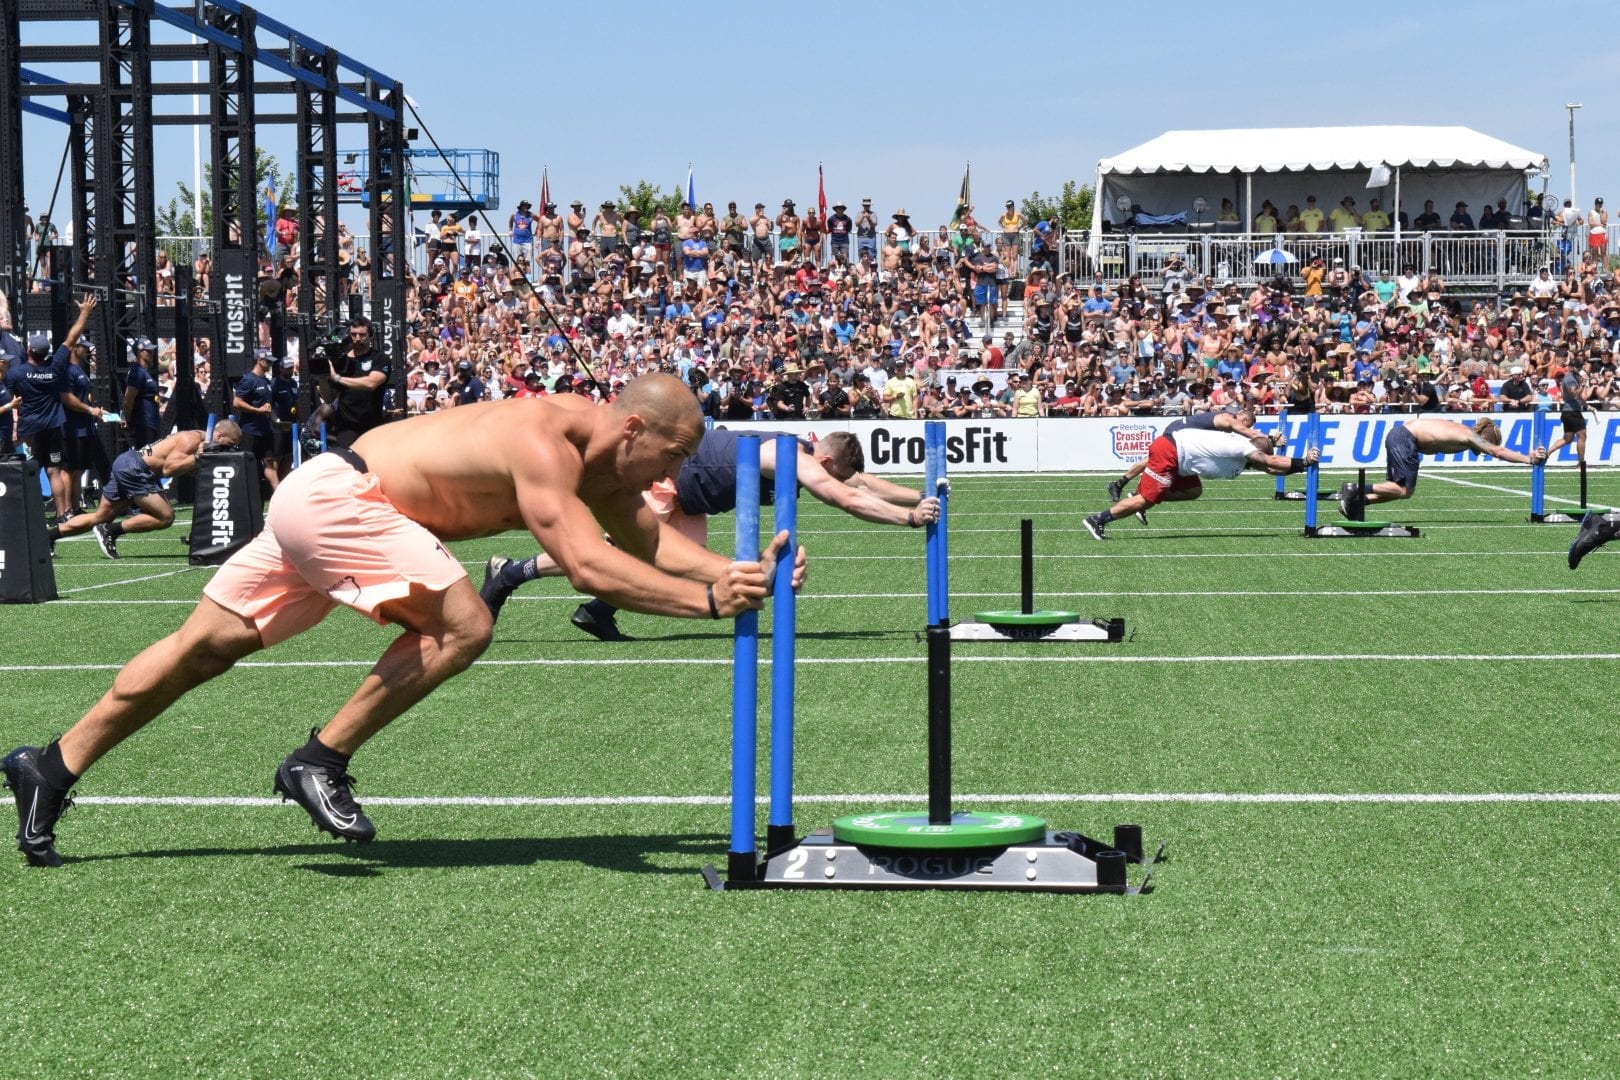 Cole Sager completes the Sprint Bicouplet event at the 2019 CrossFit Games